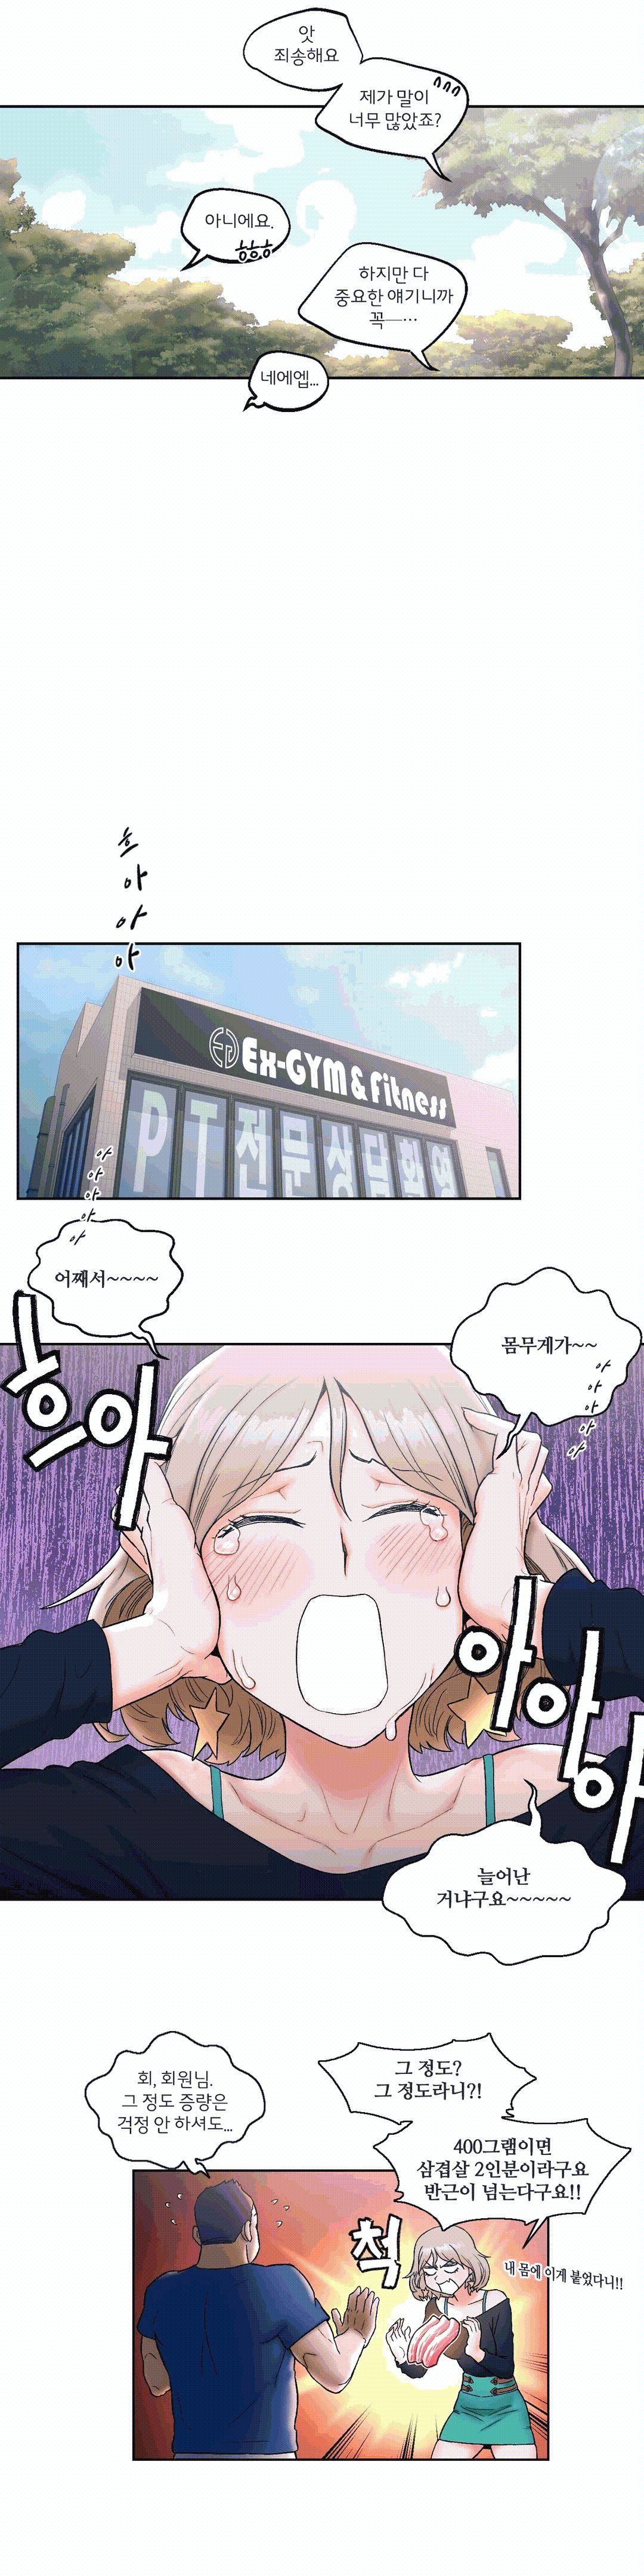 Sexercise Raw - Chapter 15 Page 11